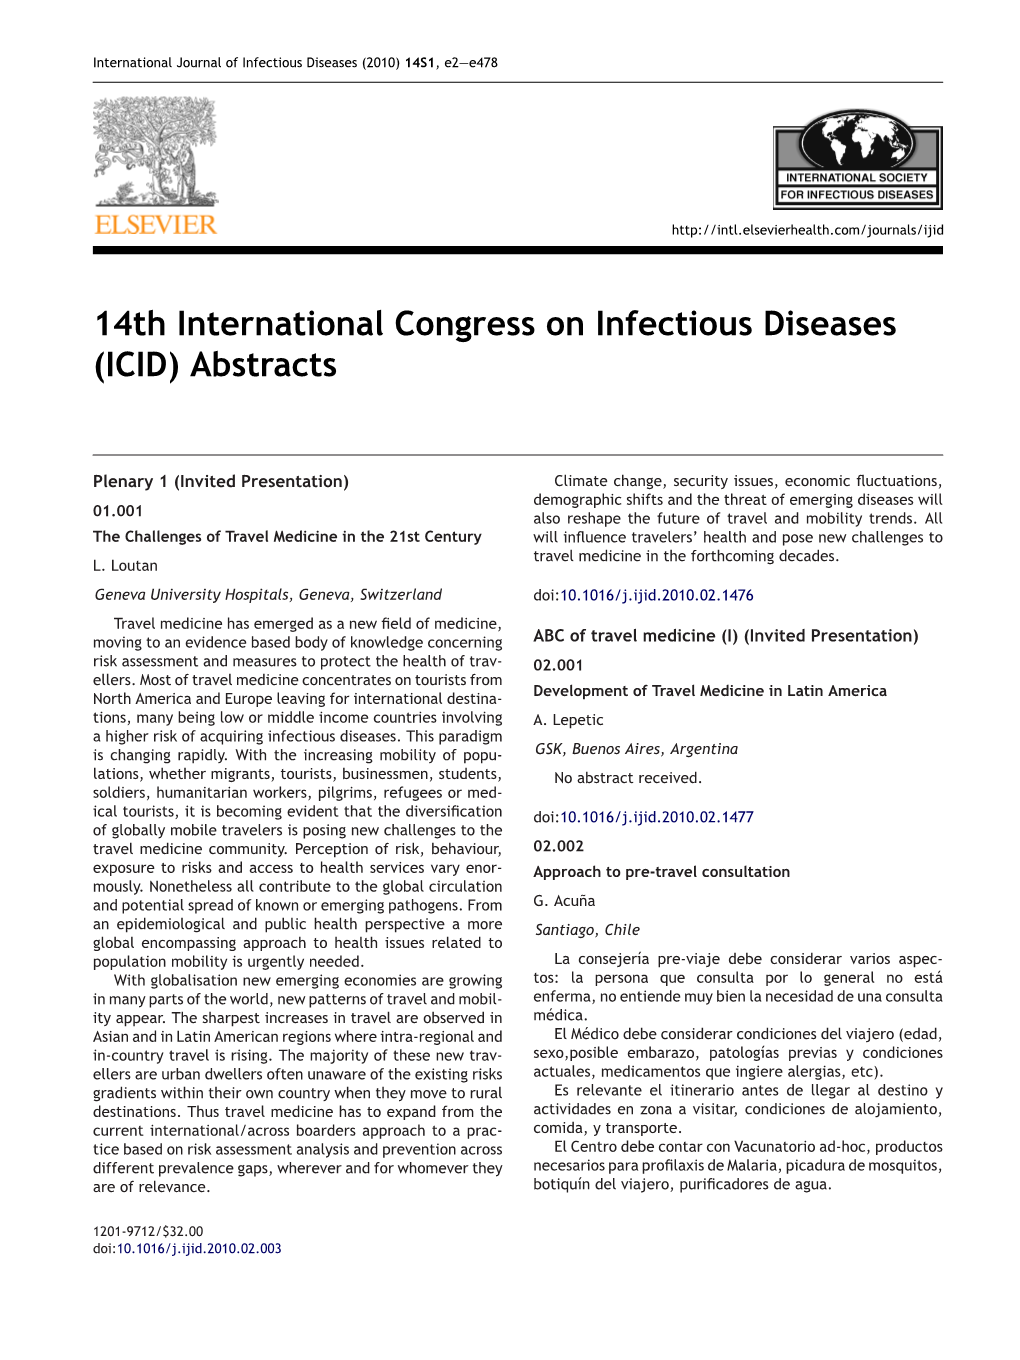 14Th International Congress on Infectious Diseases (ICID) Abstracts